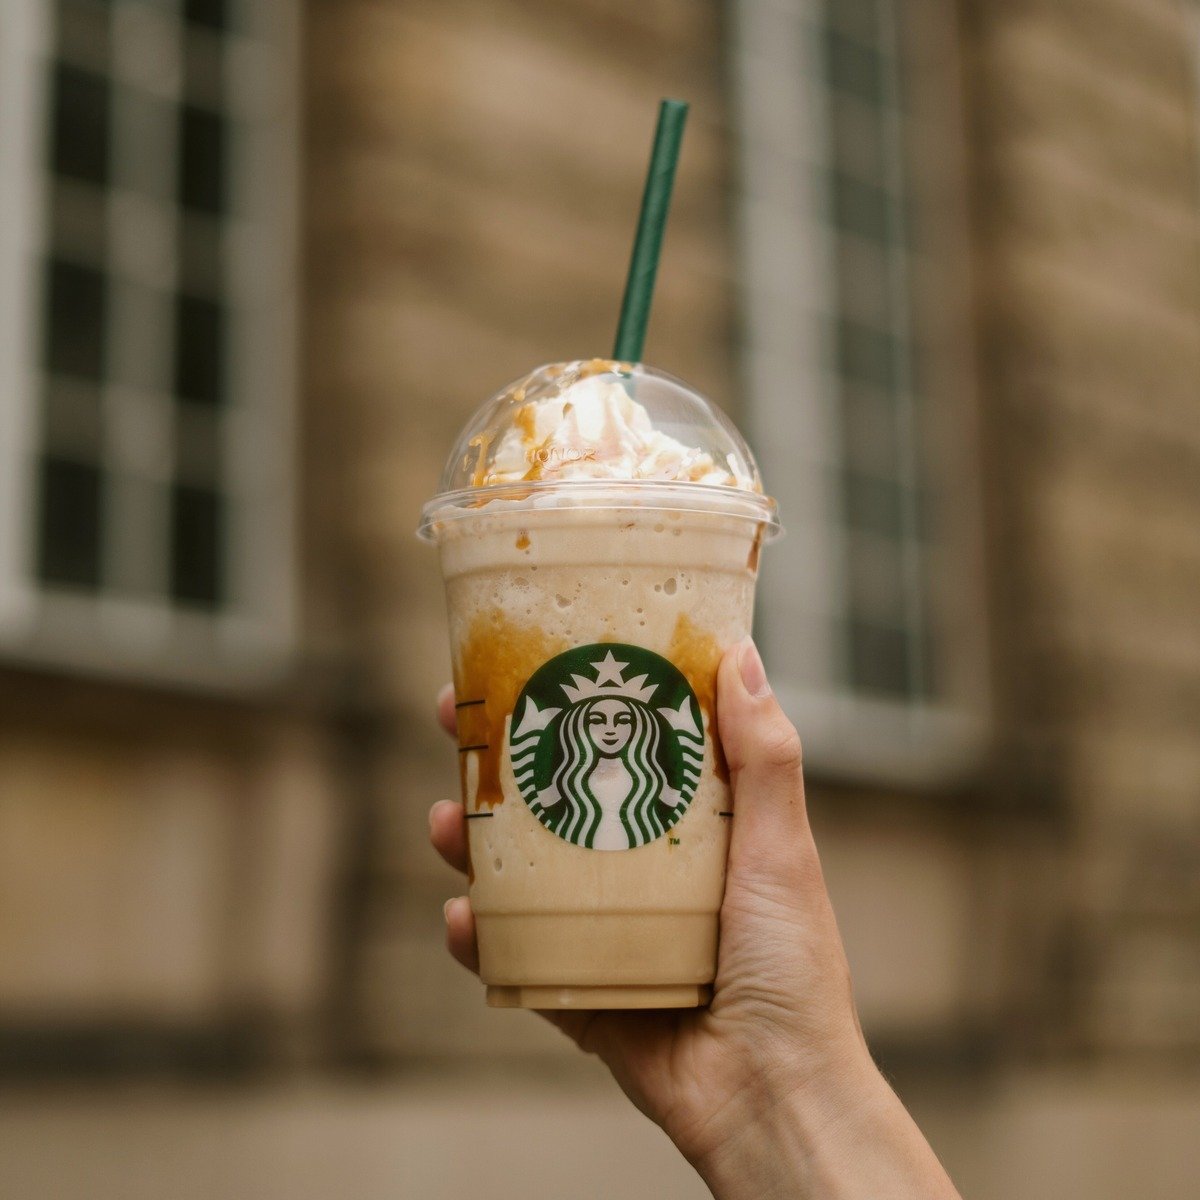 hand holding up cup of starbucks frappuccino stone building in background